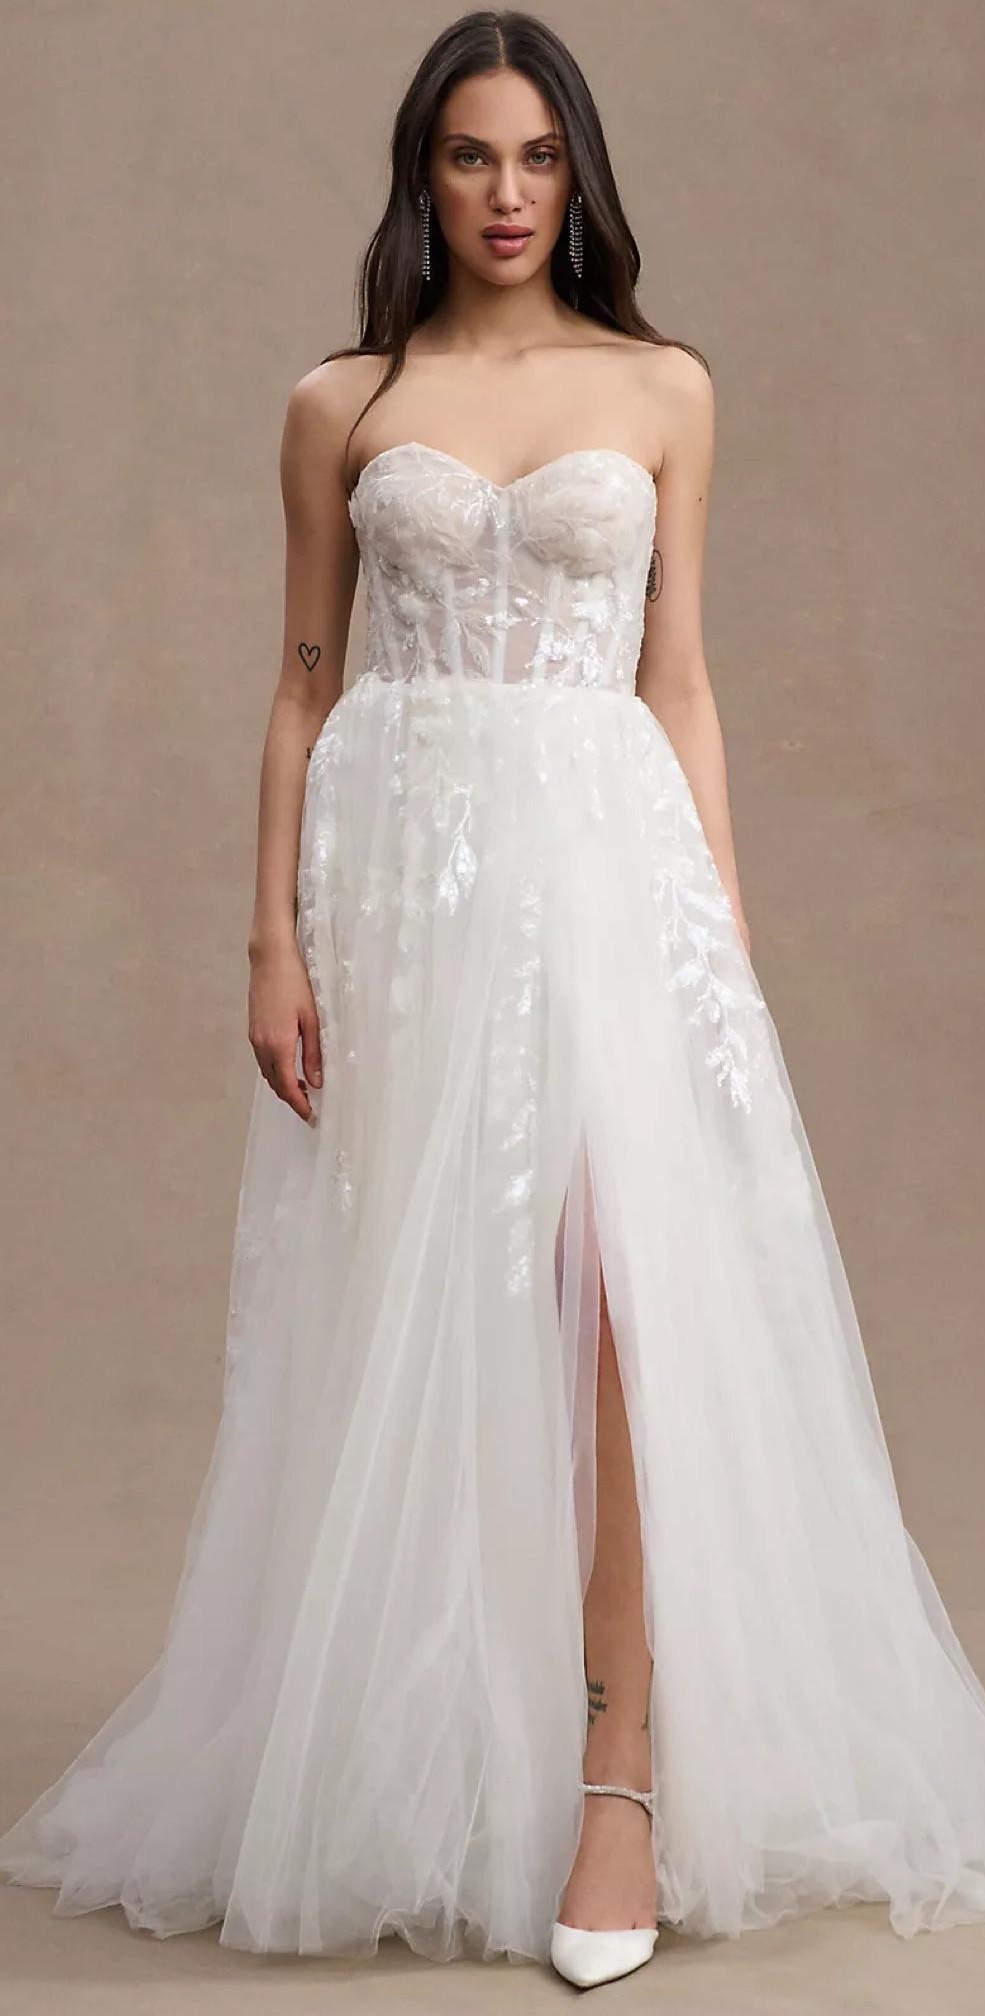 The bride's dress had a similar corset bodice and A-line chiffon skirt